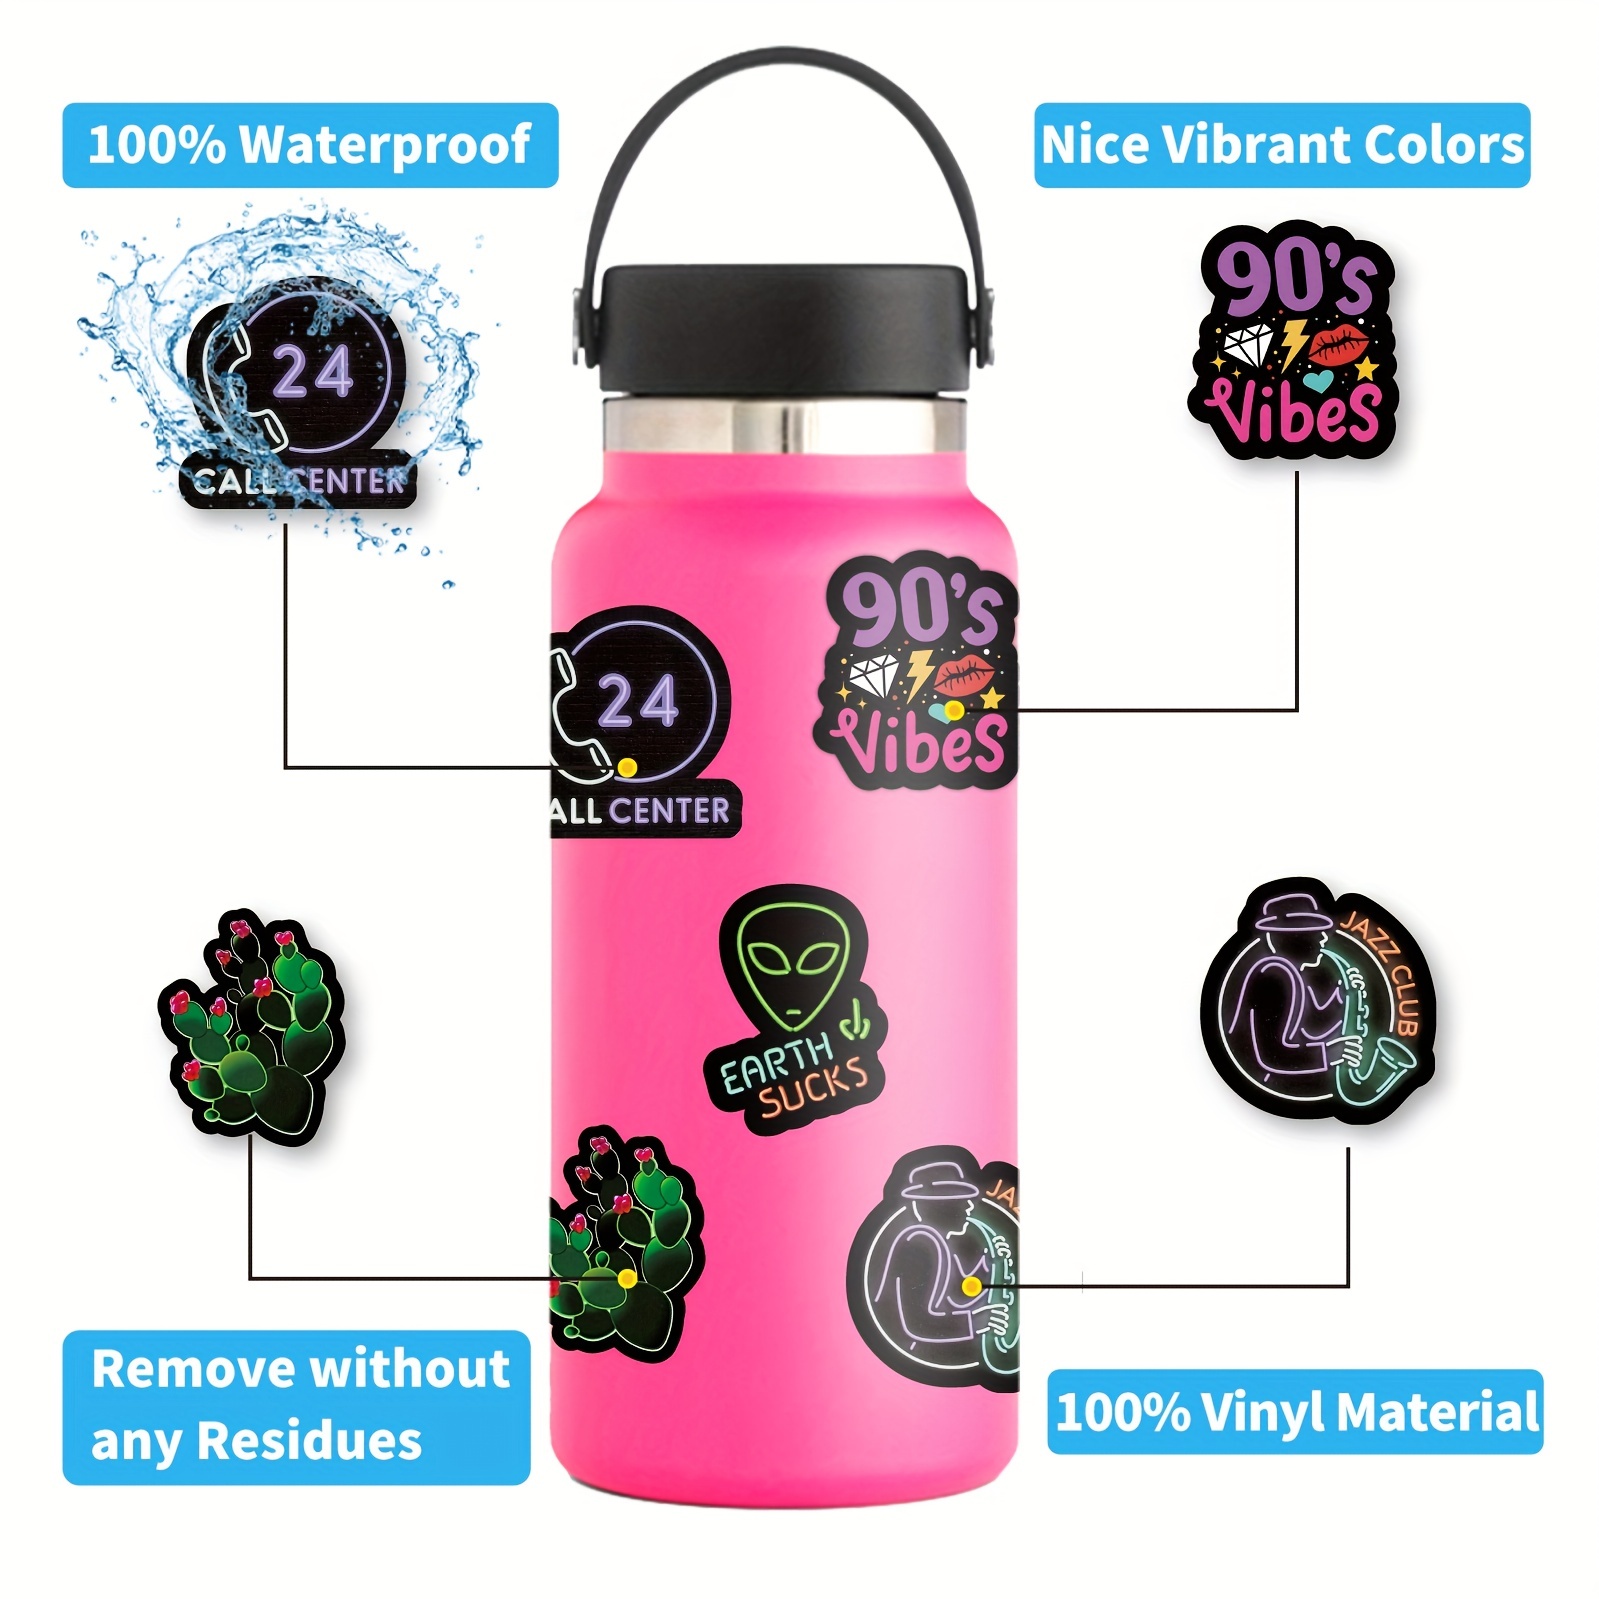 Neon Stickers for Adults, 50Pcs Waterproof Vinyl Stickers Pack for Water  Bottle, Hydro Flask, Laptop, Skateboard, Luggage, Phone : Electronics 